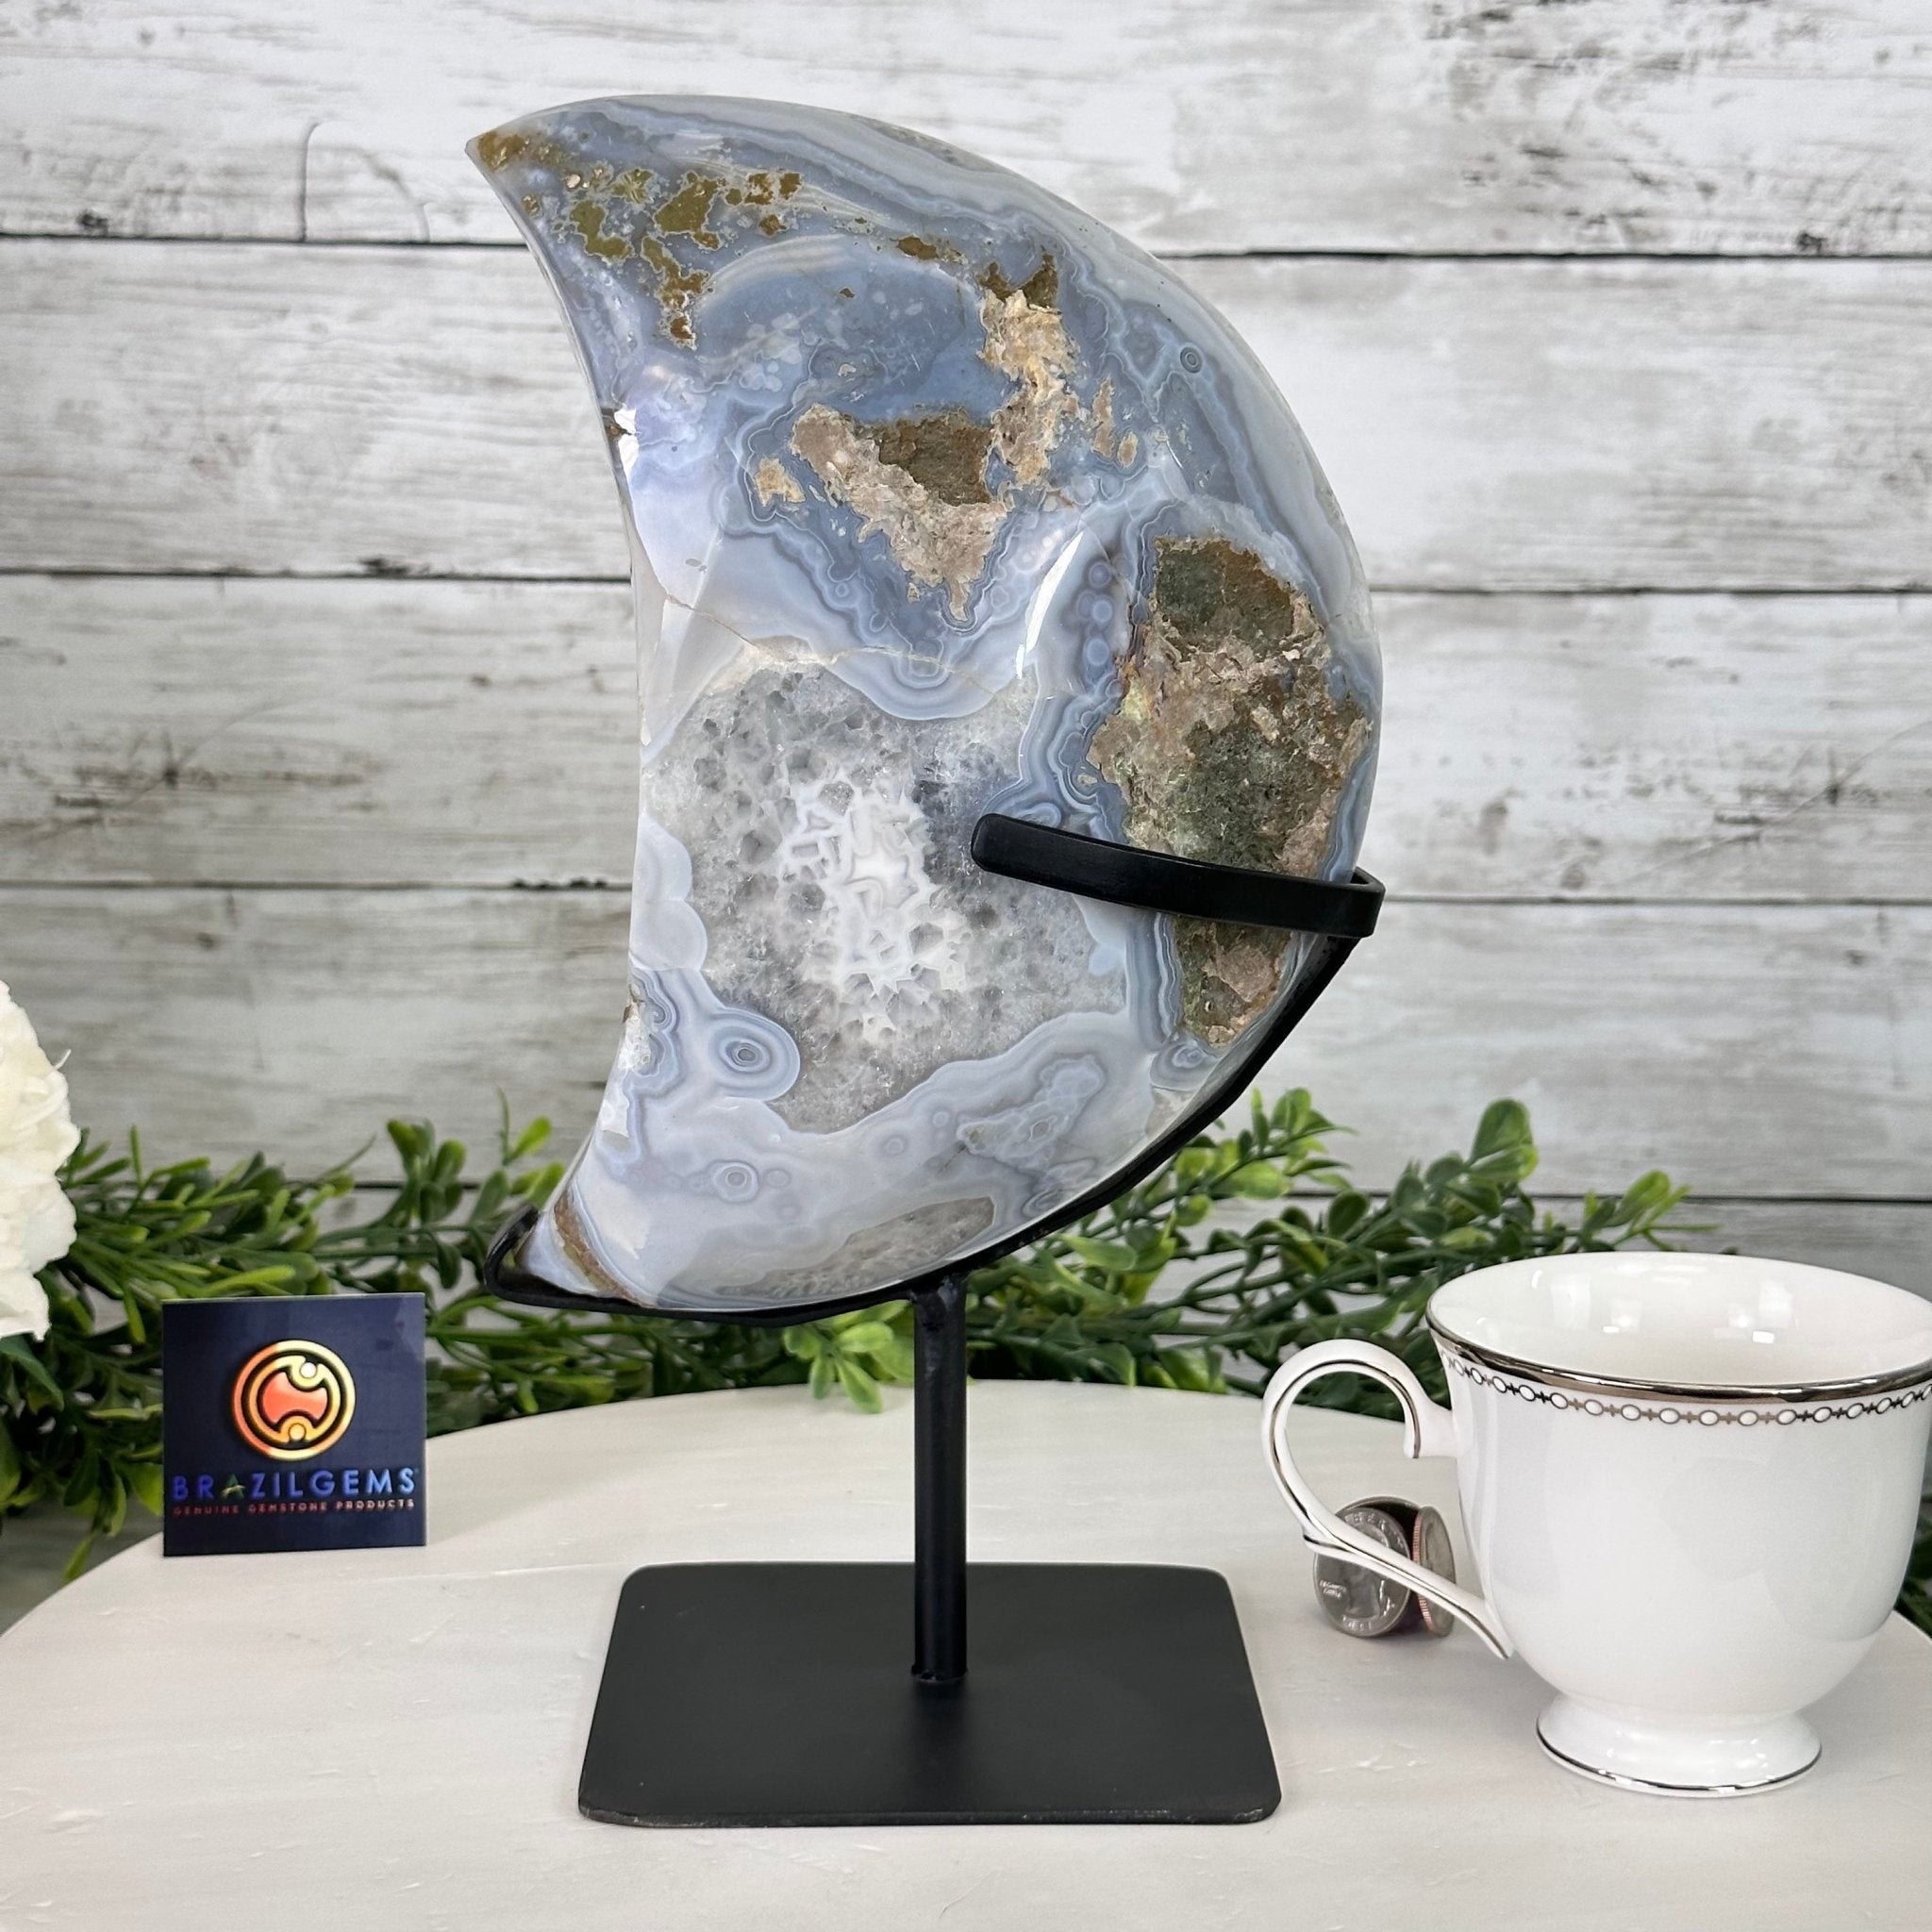 Polished Agate Crescent Moon on a Stand, 6.3 lbs & 11" Tall #5740NA-011 by Brazil Gems - Brazil GemsBrazil GemsPolished Agate Crescent Moon on a Stand, 6.3 lbs & 11" Tall #5740NA-011 by Brazil GemsCrescent Moons5740NA-011